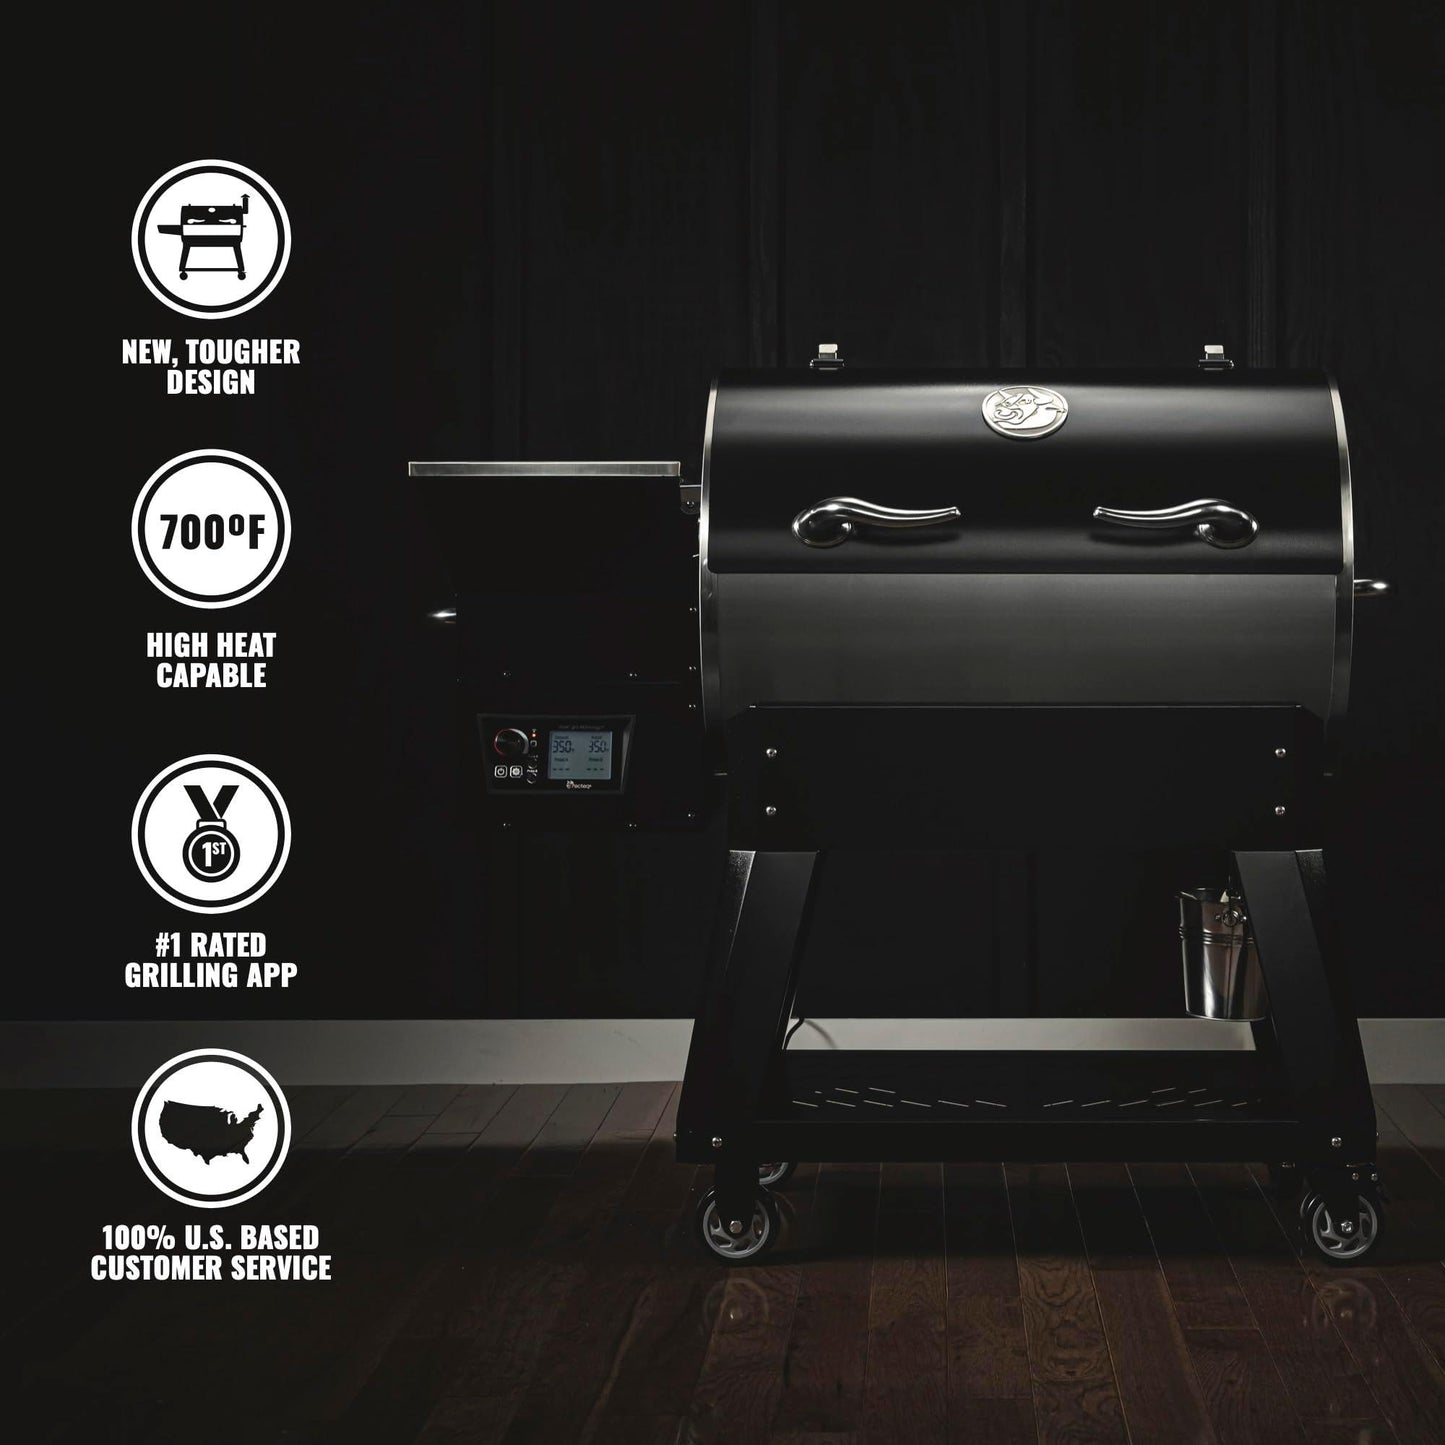 recteq Deck Boss RT-590 Wood Pellet Smoker Grill | Wi-Fi-Enabled, Electric Pellet Grill | 592 Square Inches of Cook Space - CookCave